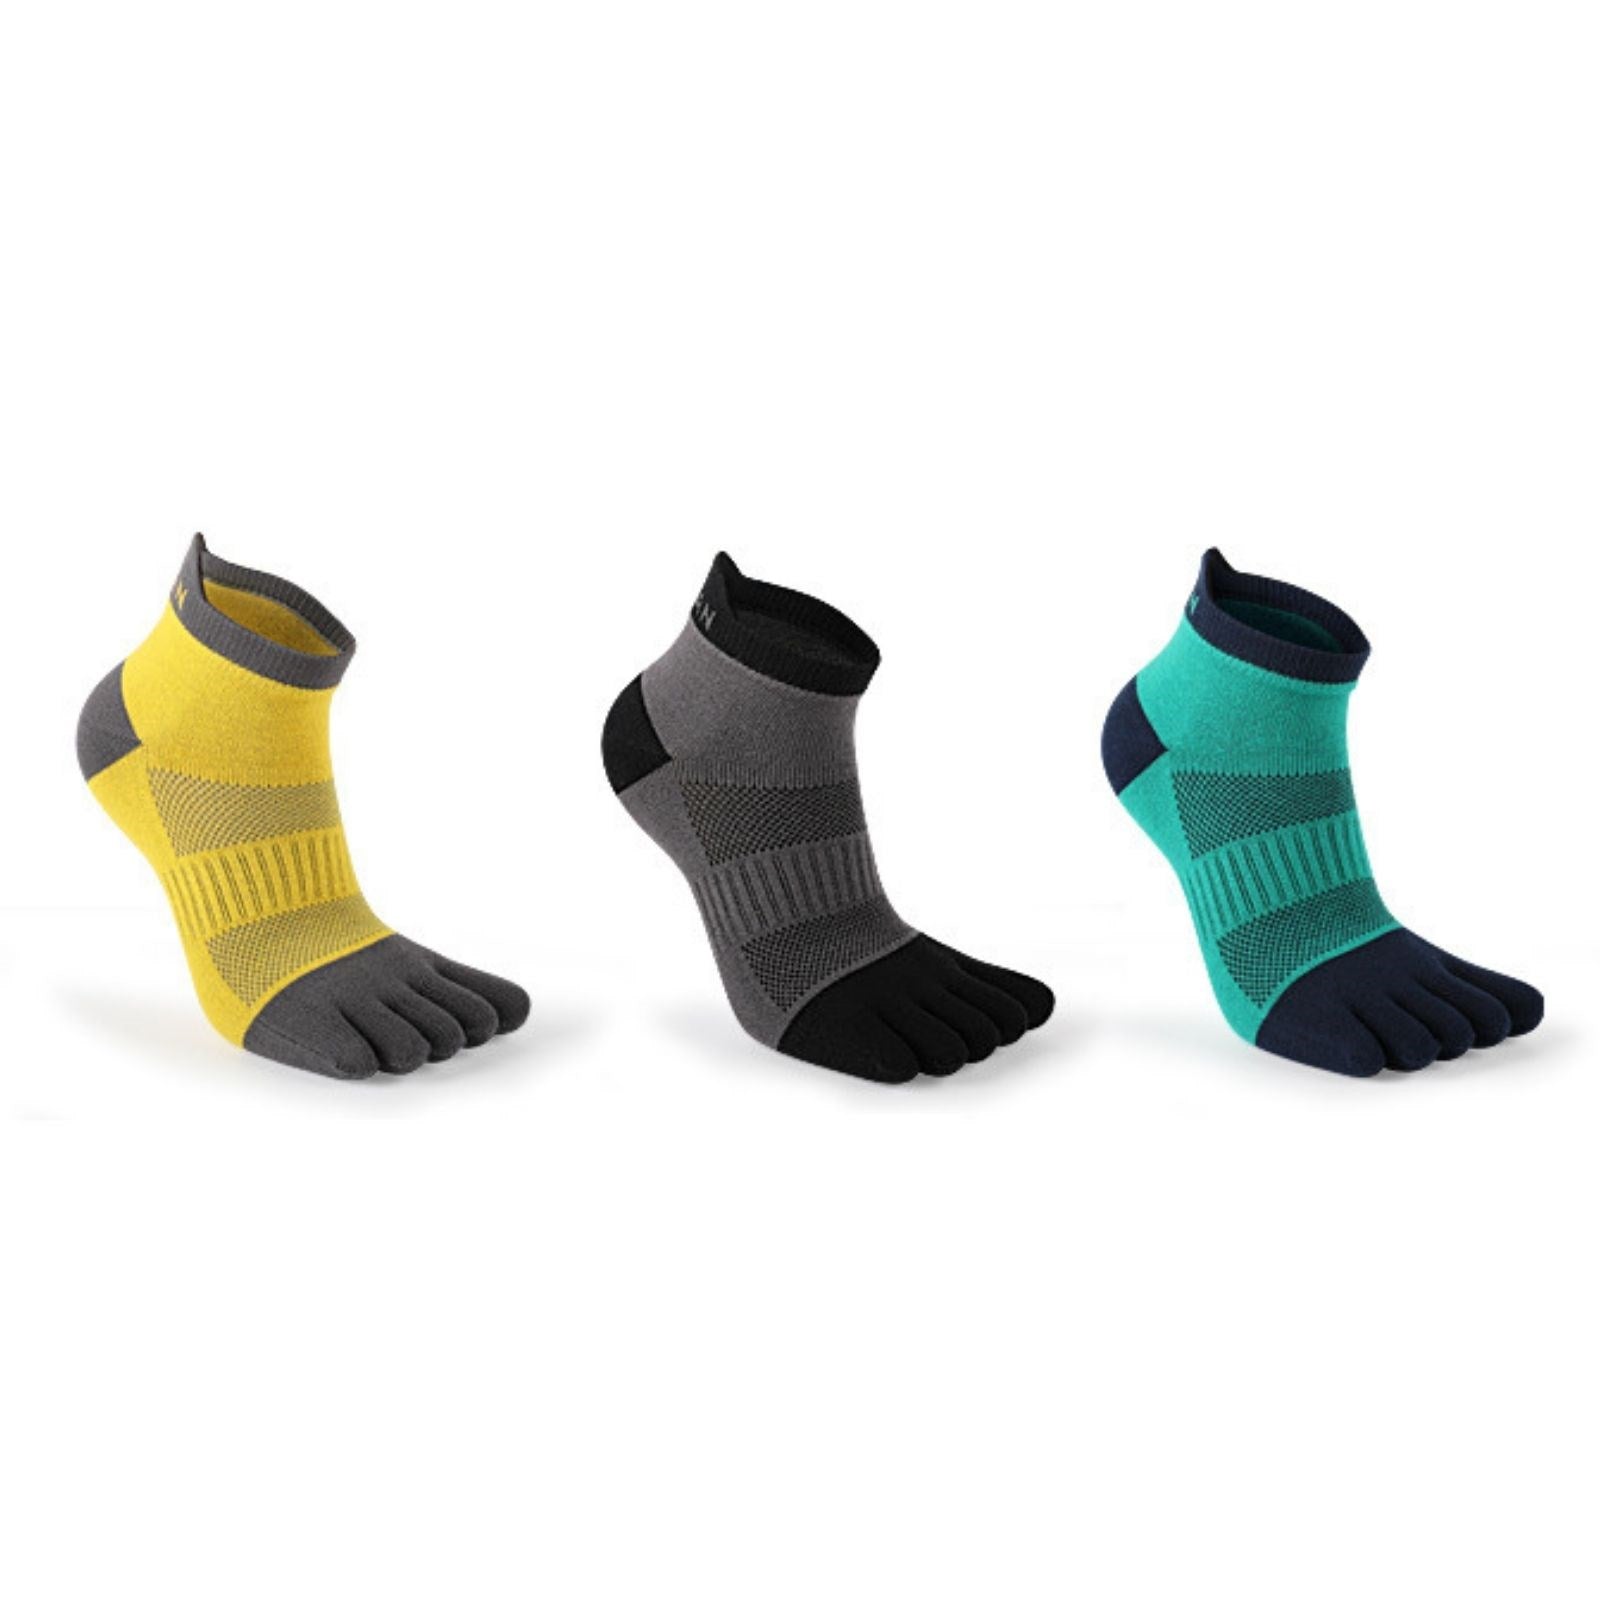 Men's clothing, pants, t-shirts for yoga, climbing - Free shipping - Toesox  toeless socks for barefoot sports